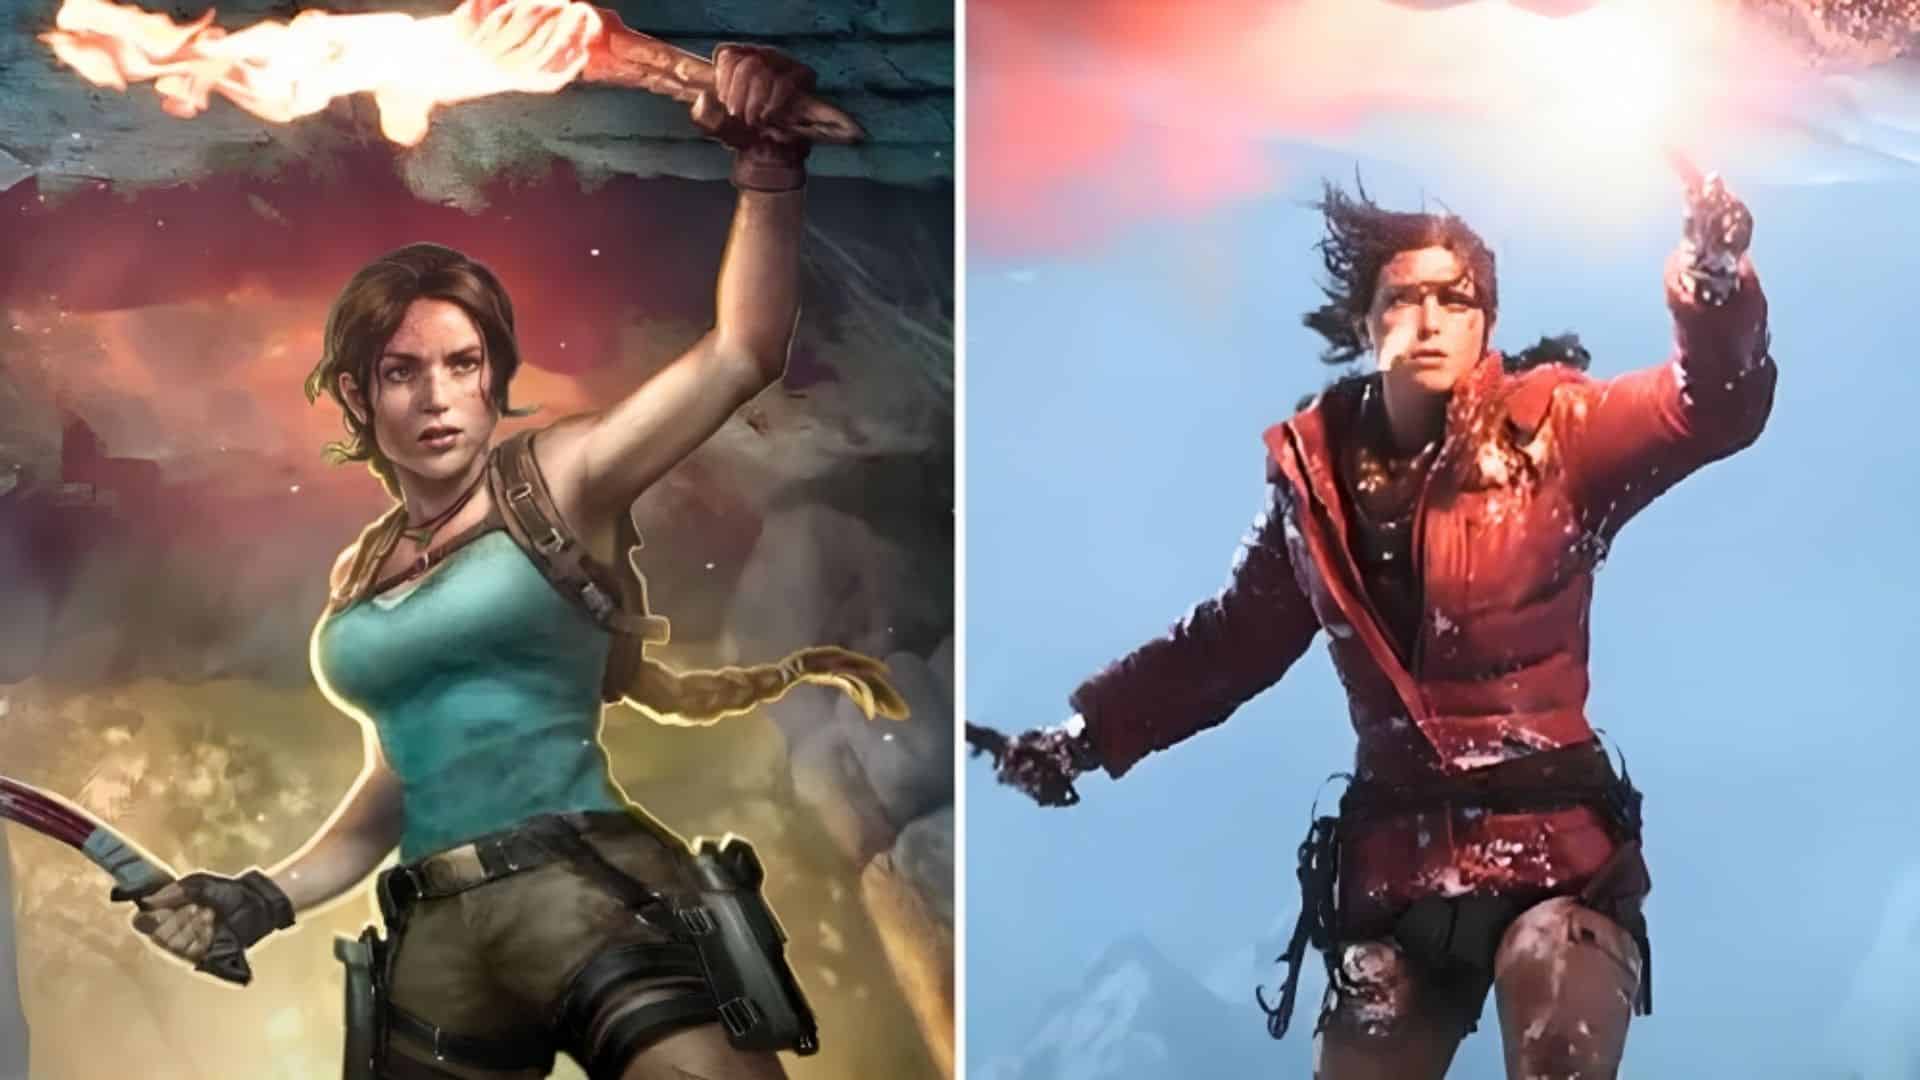 Tomb Raider Magic The Gathering next to Rise of the Tomb Raider